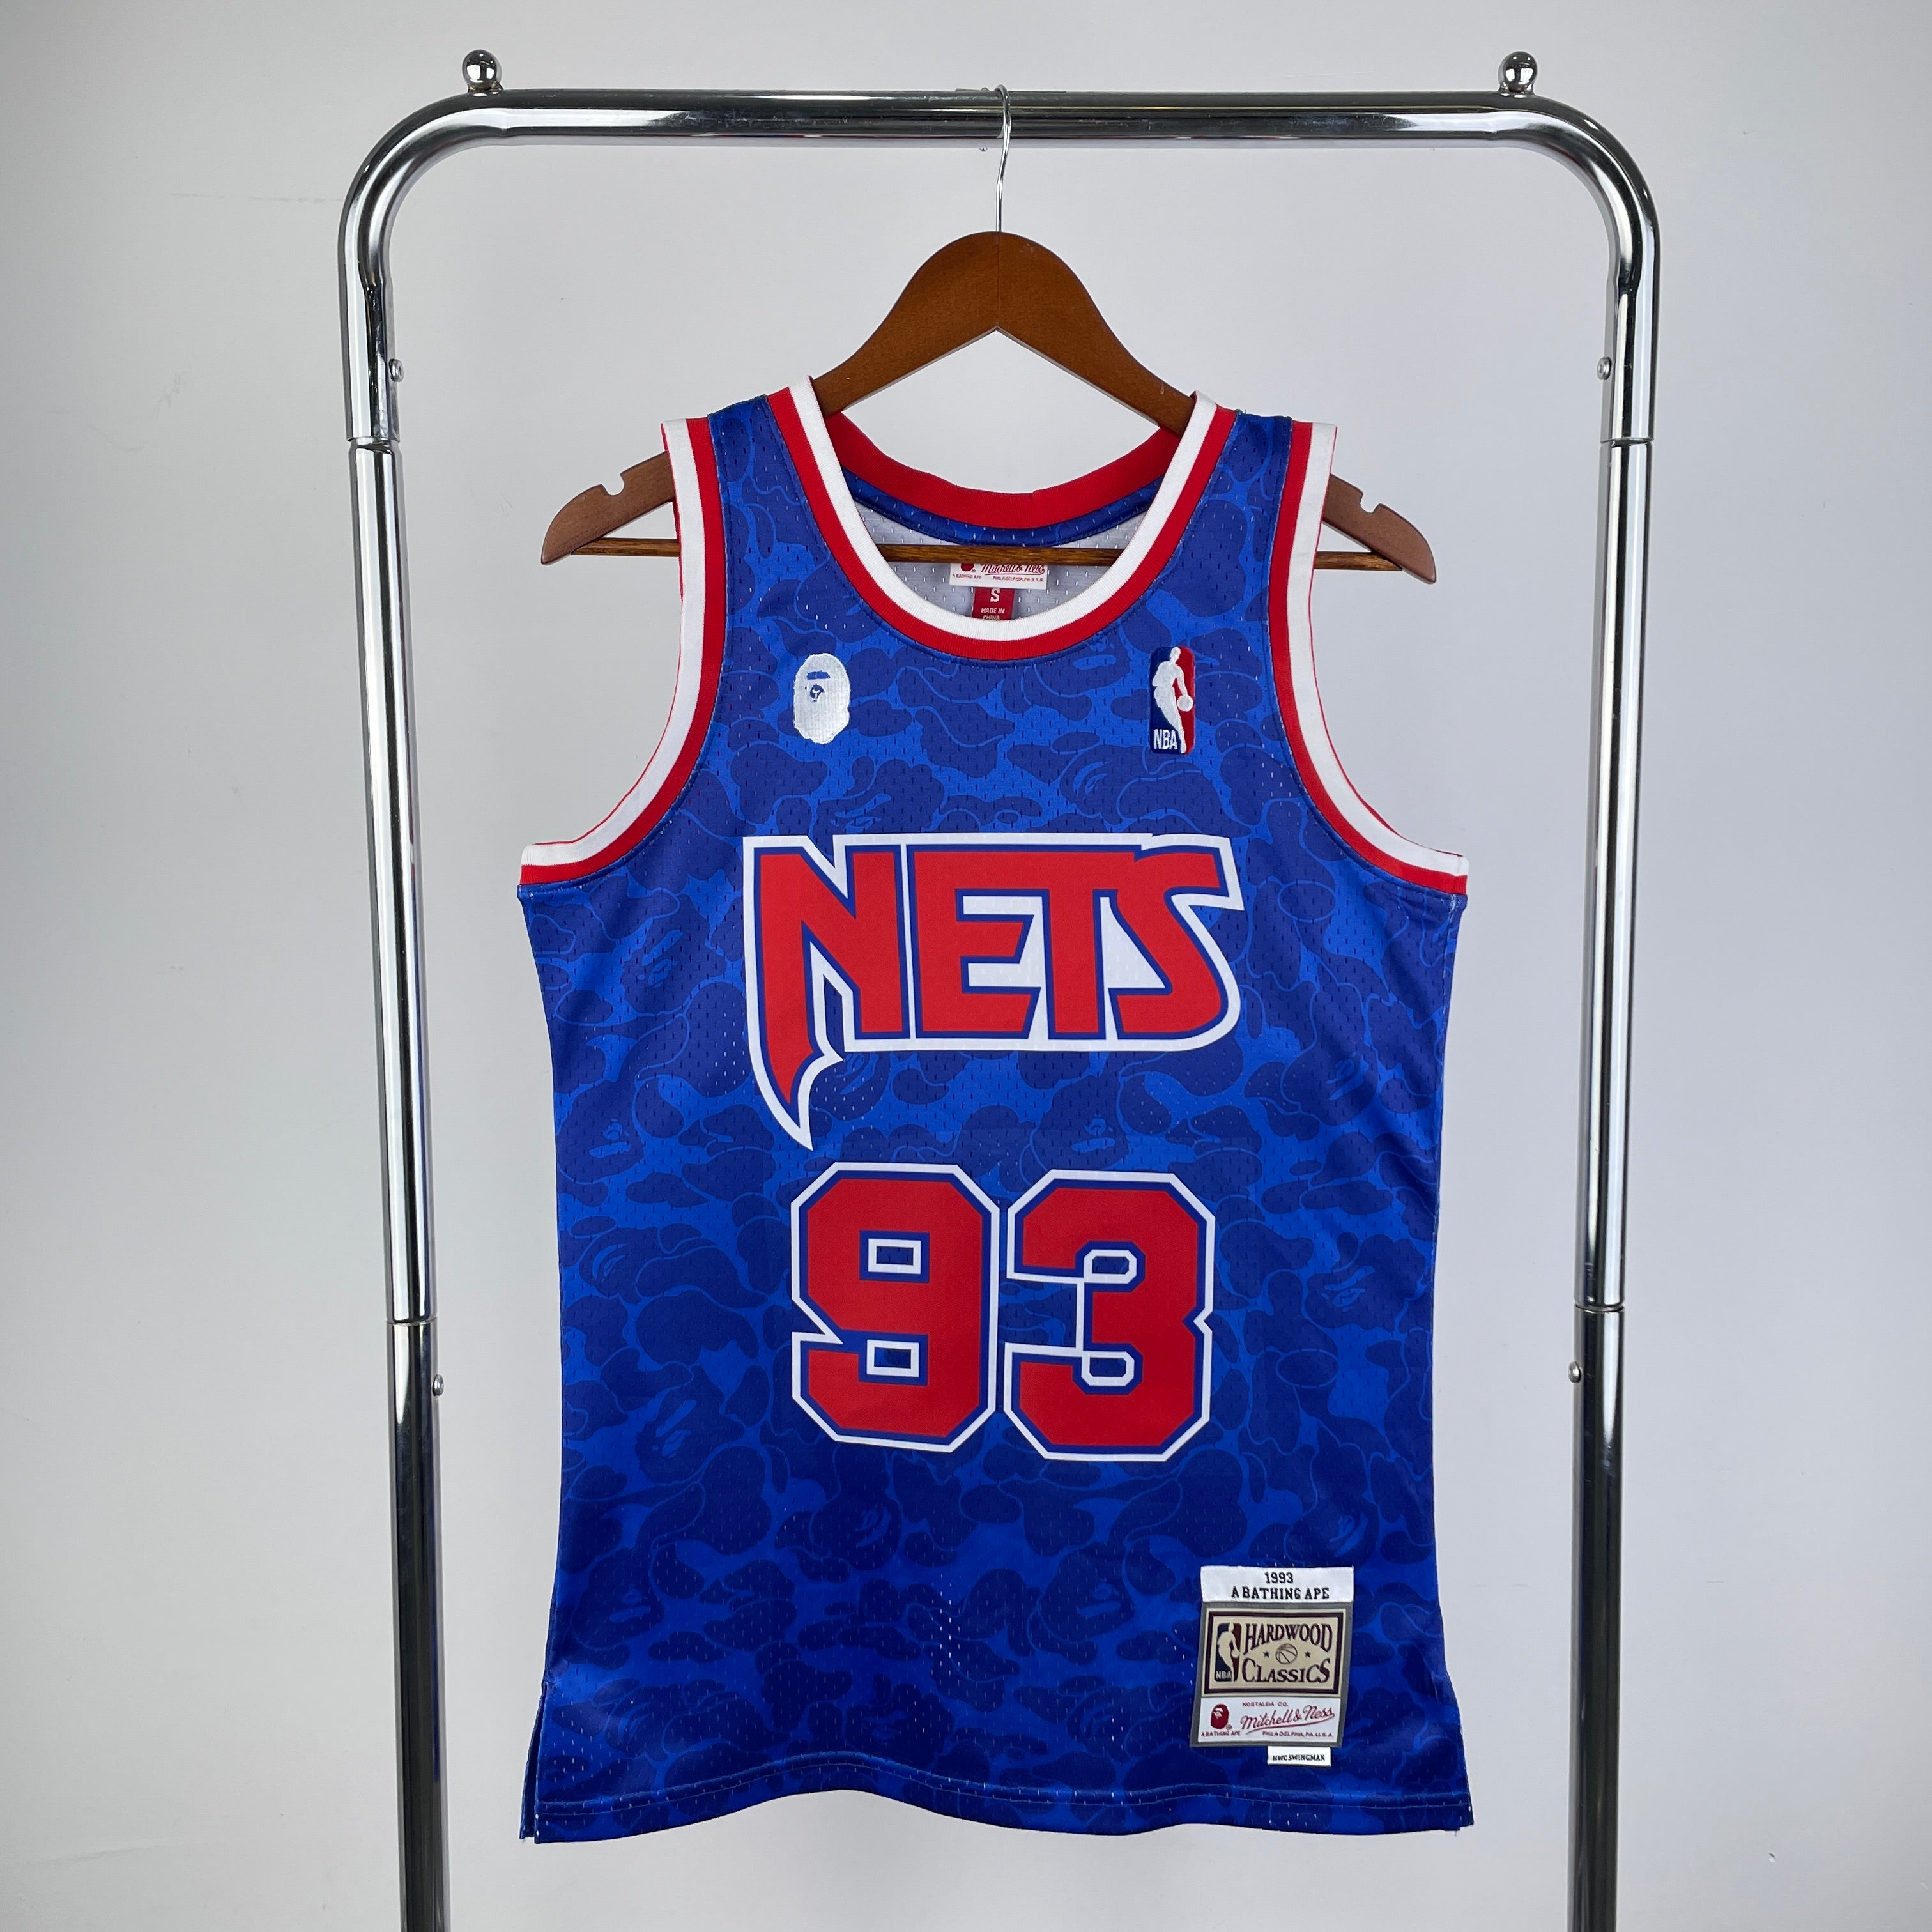 Lakers Bape Jersey Mitchell & Ness Hardwood Classics for Sale in